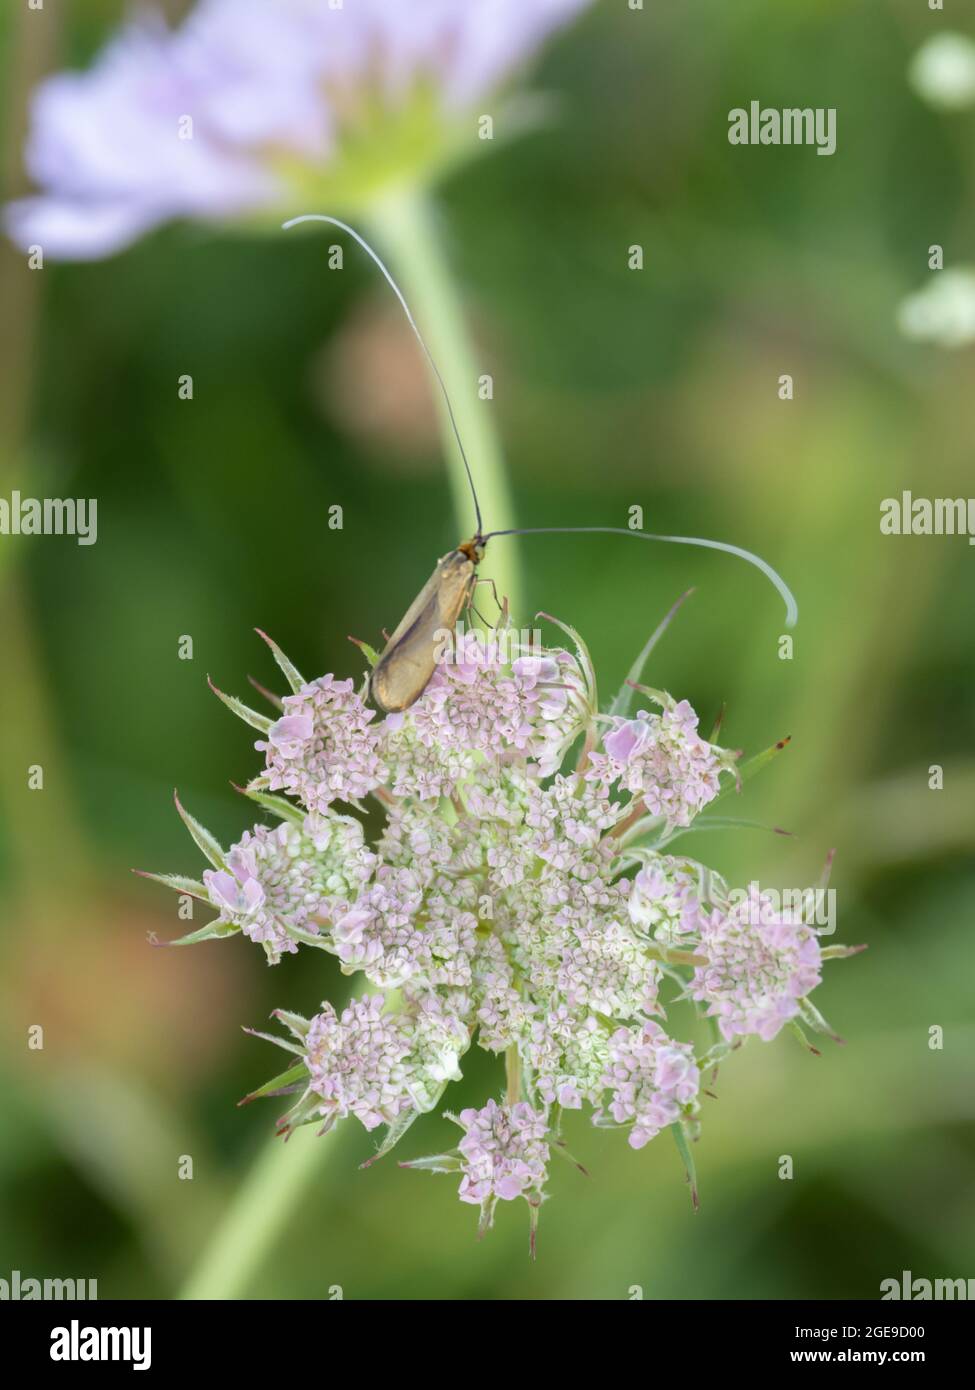 Nemophora metallica which is a species of fairy longhorn moth, resting on a flower. Stock Photo